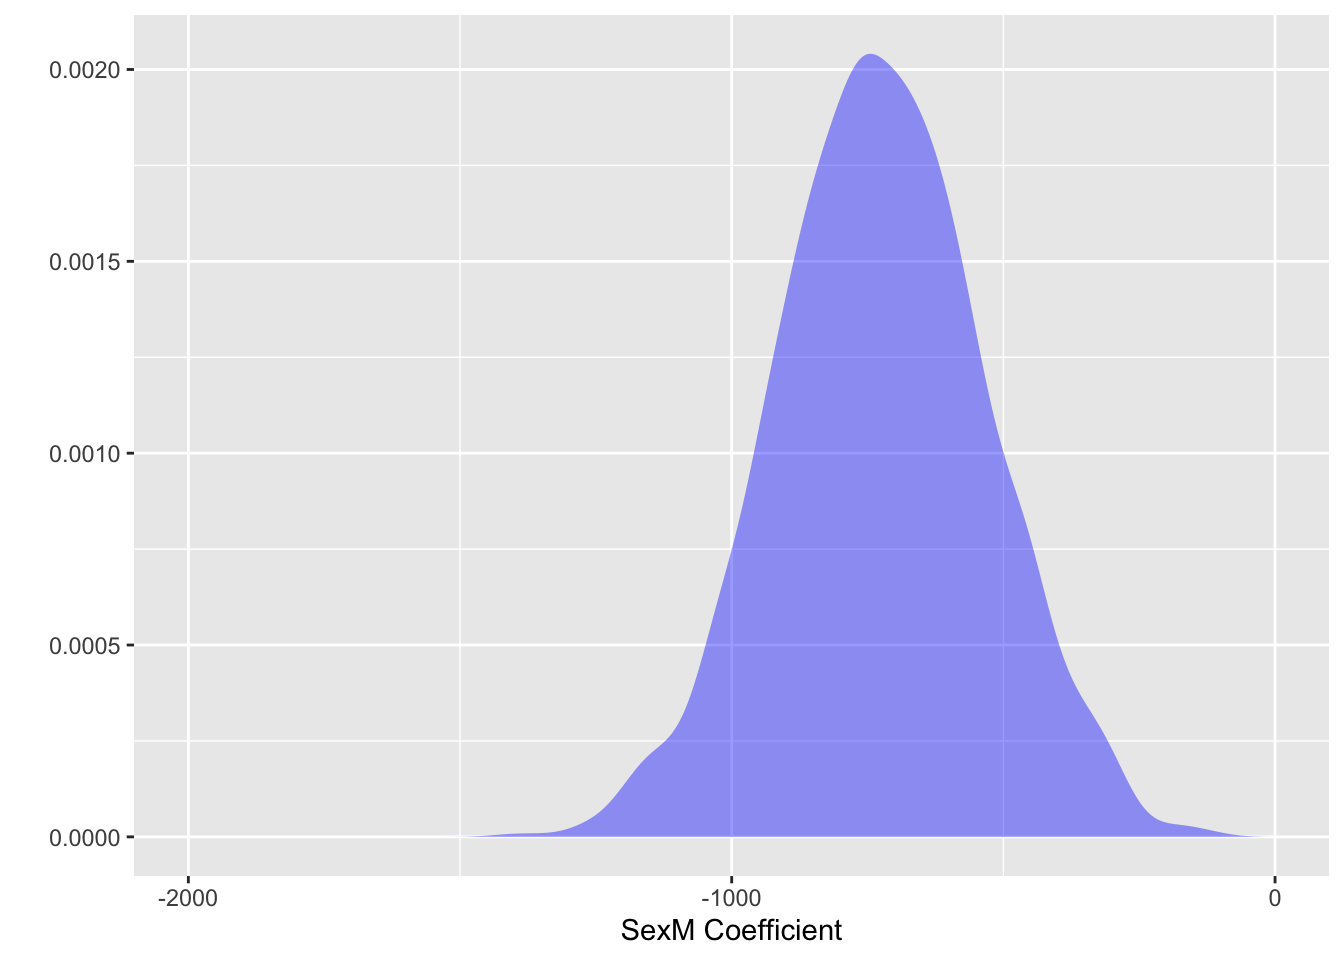 Sampling distributions for the `age` and `sex` coefficients for a sample size of n = 100. The bell-shaped distributions are centered on the population value.